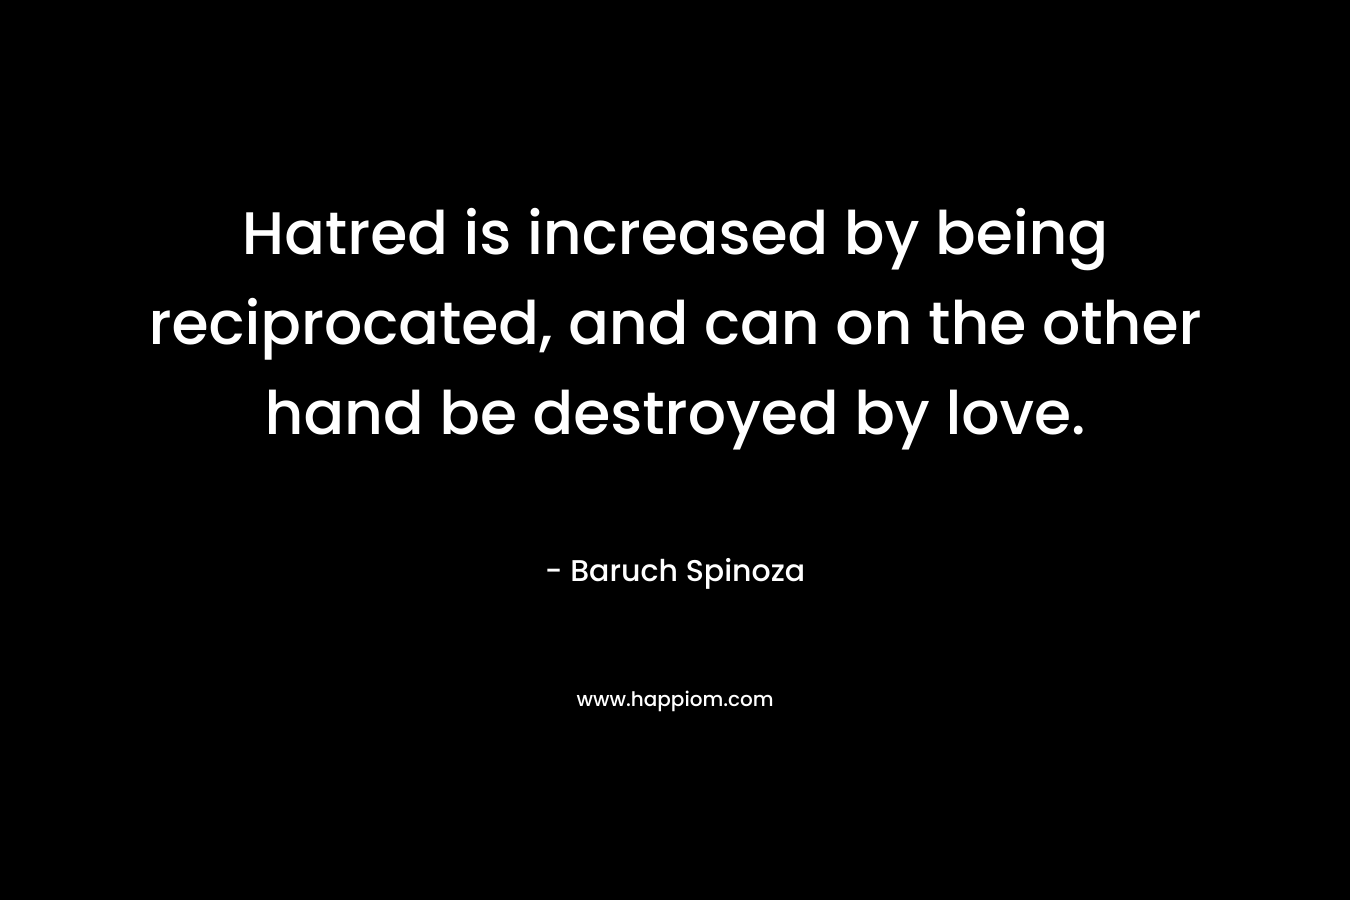 Hatred is increased by being reciprocated, and can on the other hand be destroyed by love.